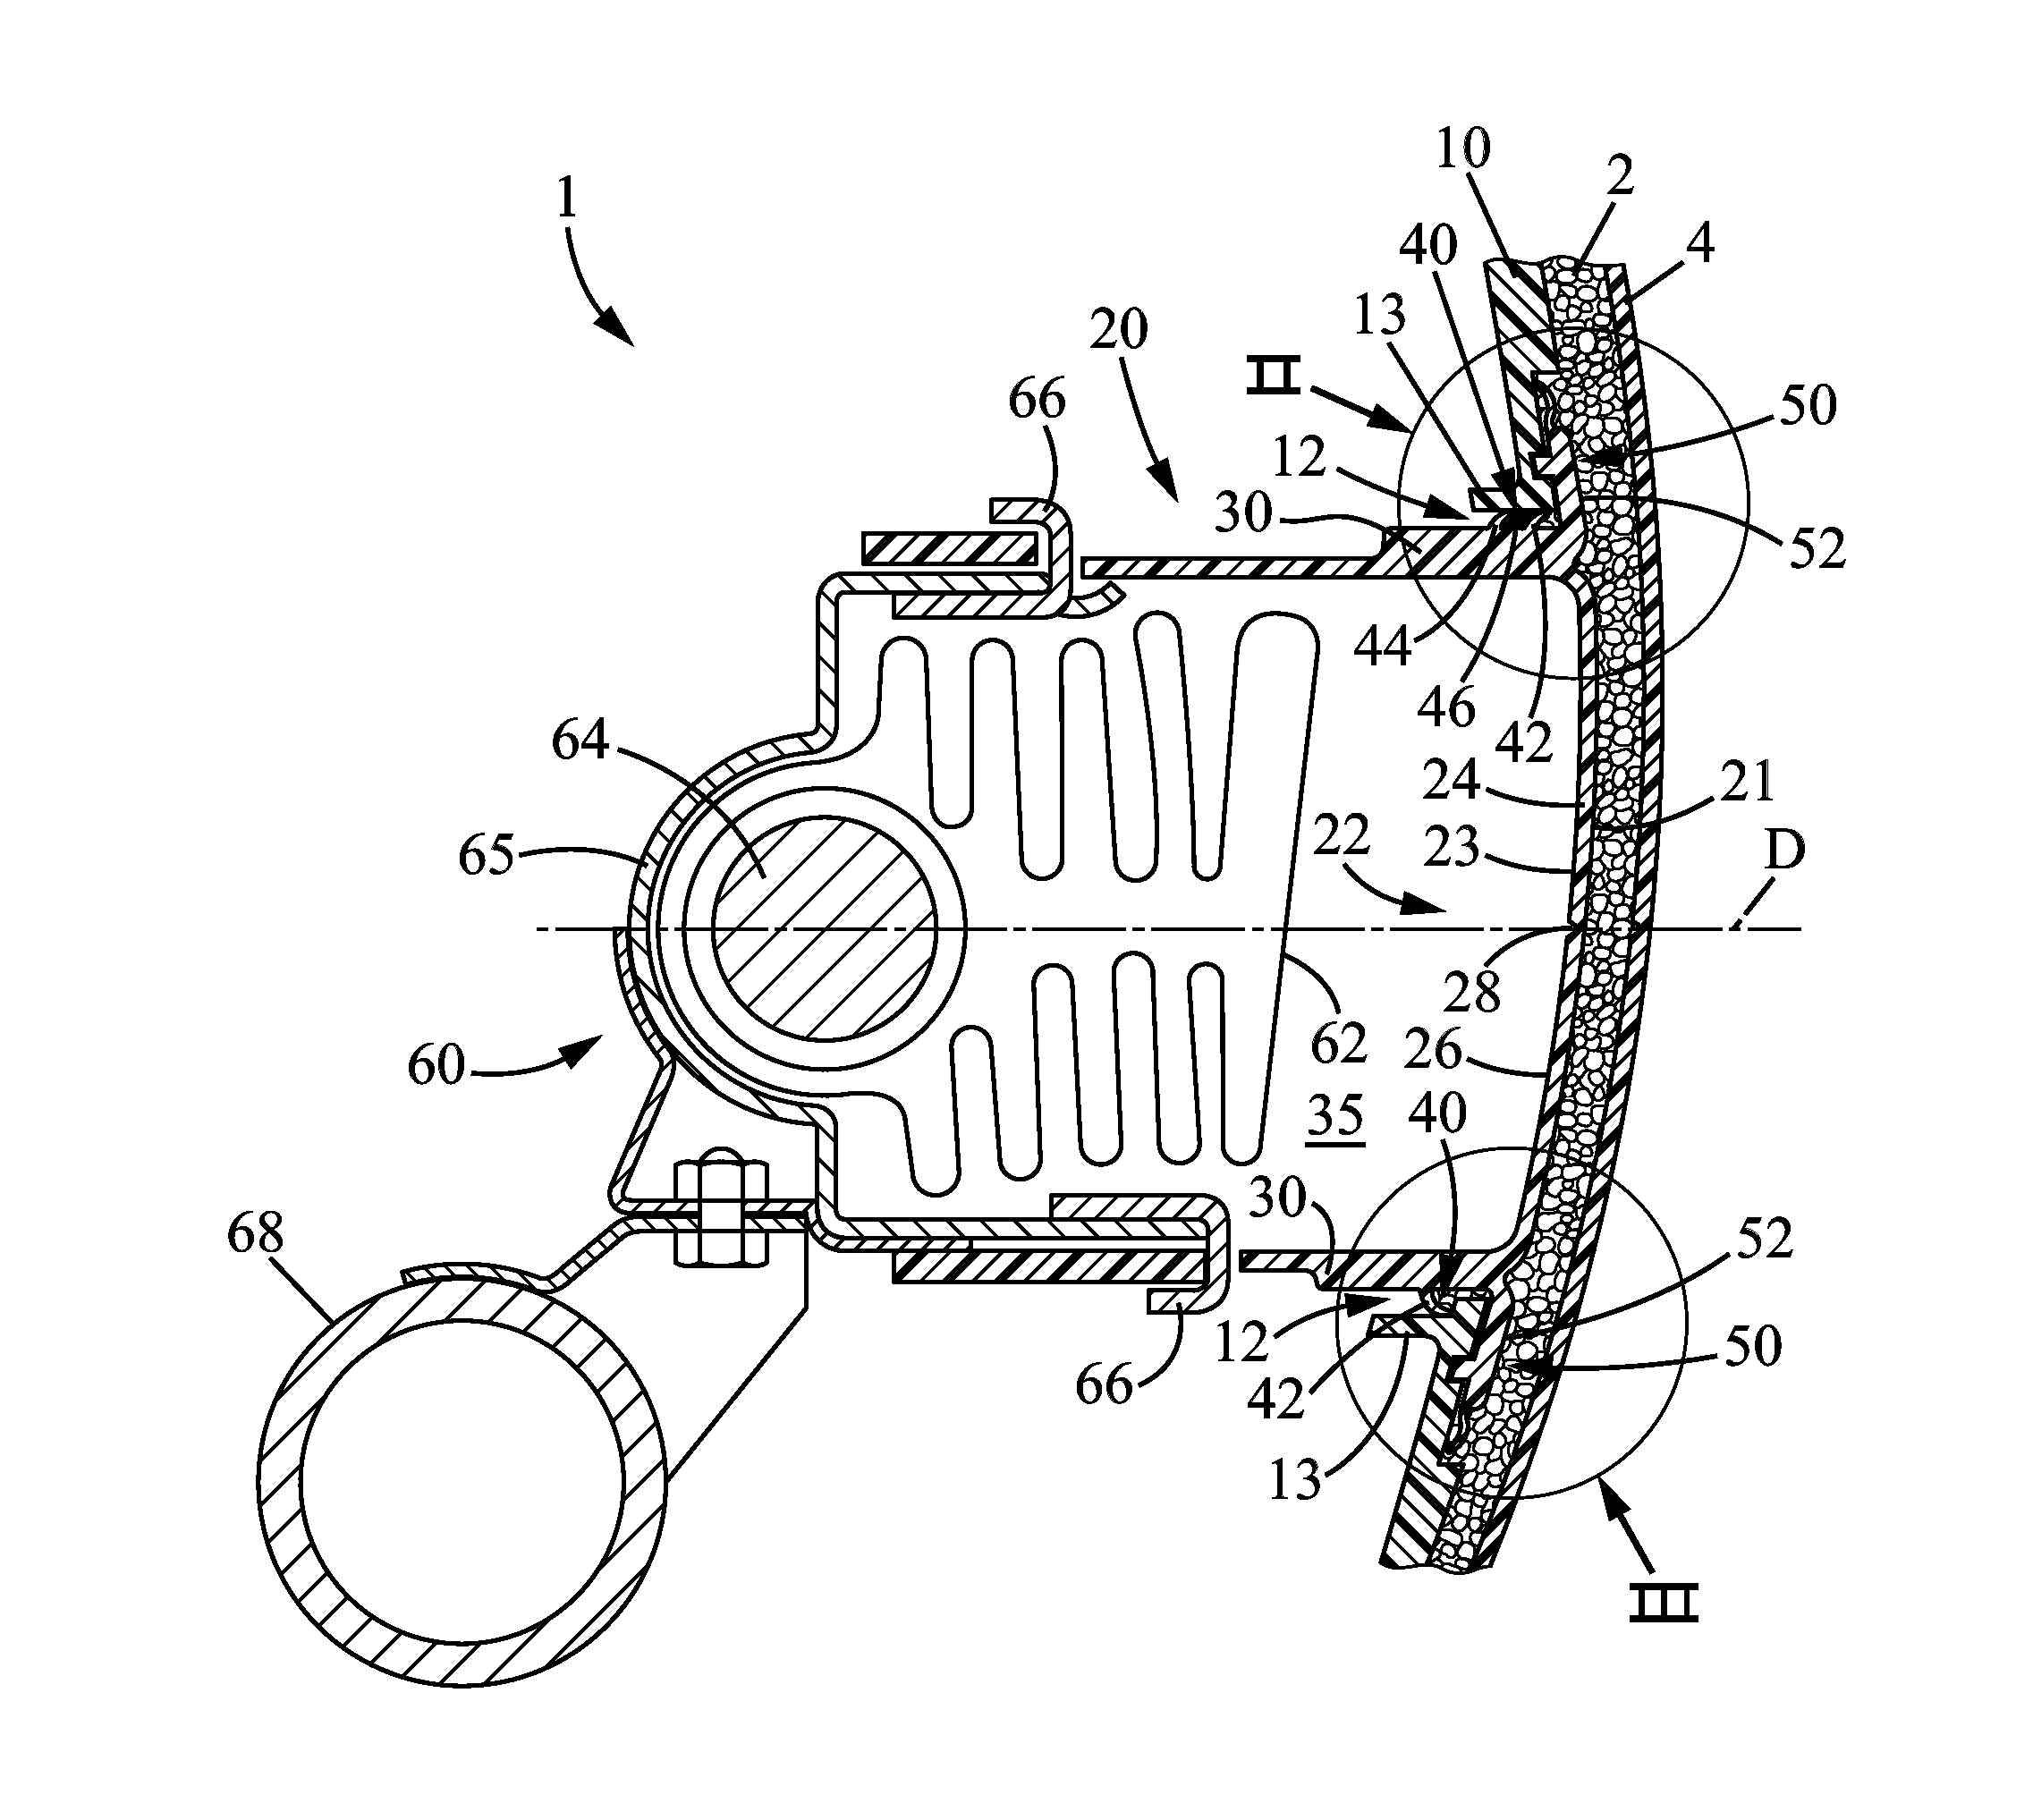 Interior Trim Part for a Motor Vehicle Comprising an Airbag Door